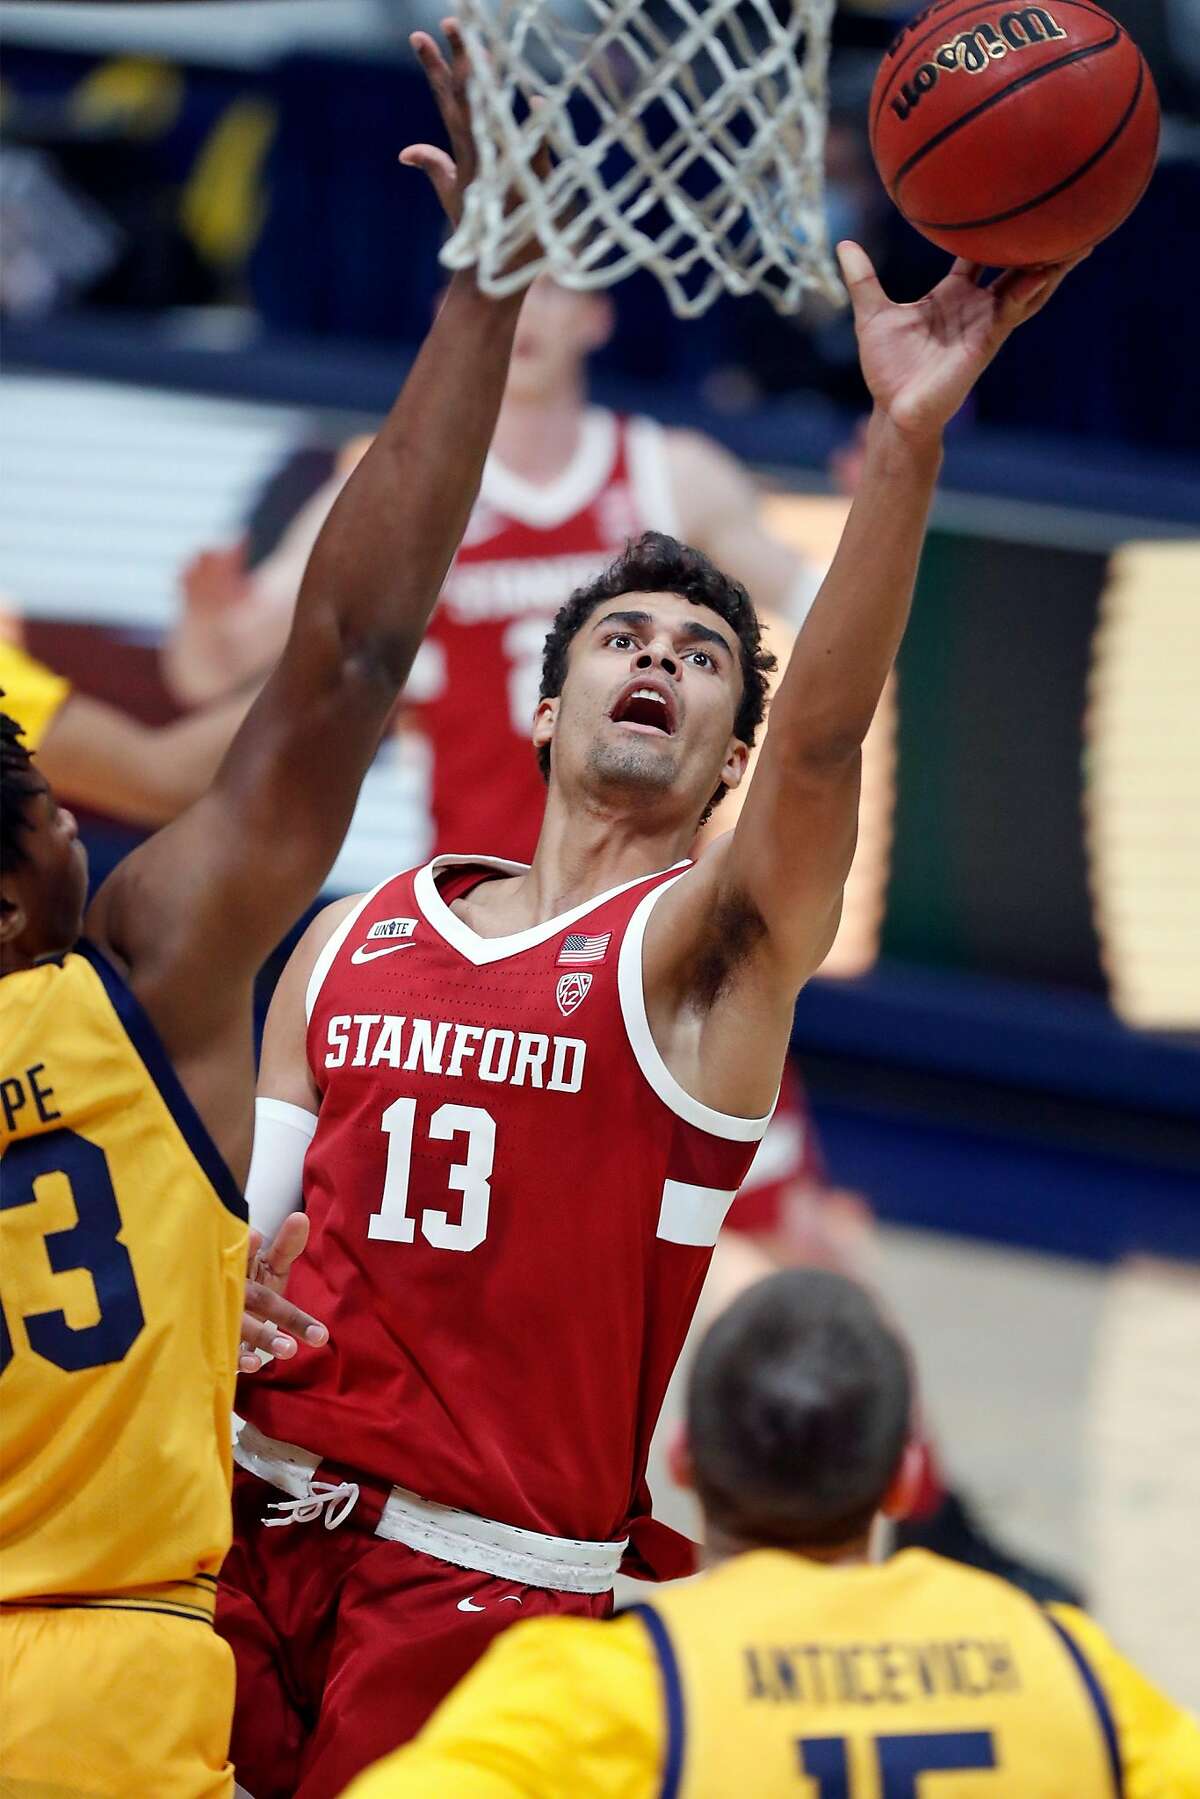 Stanford's Oscar da Silva looks to score against Cal’s D.J. Thorpe in the first half Thursday night at Haas Pavilion in Berkeley. The Pac-12’s leading scorer registered 24 points to help his team return to its winning ways after two losses in a row.